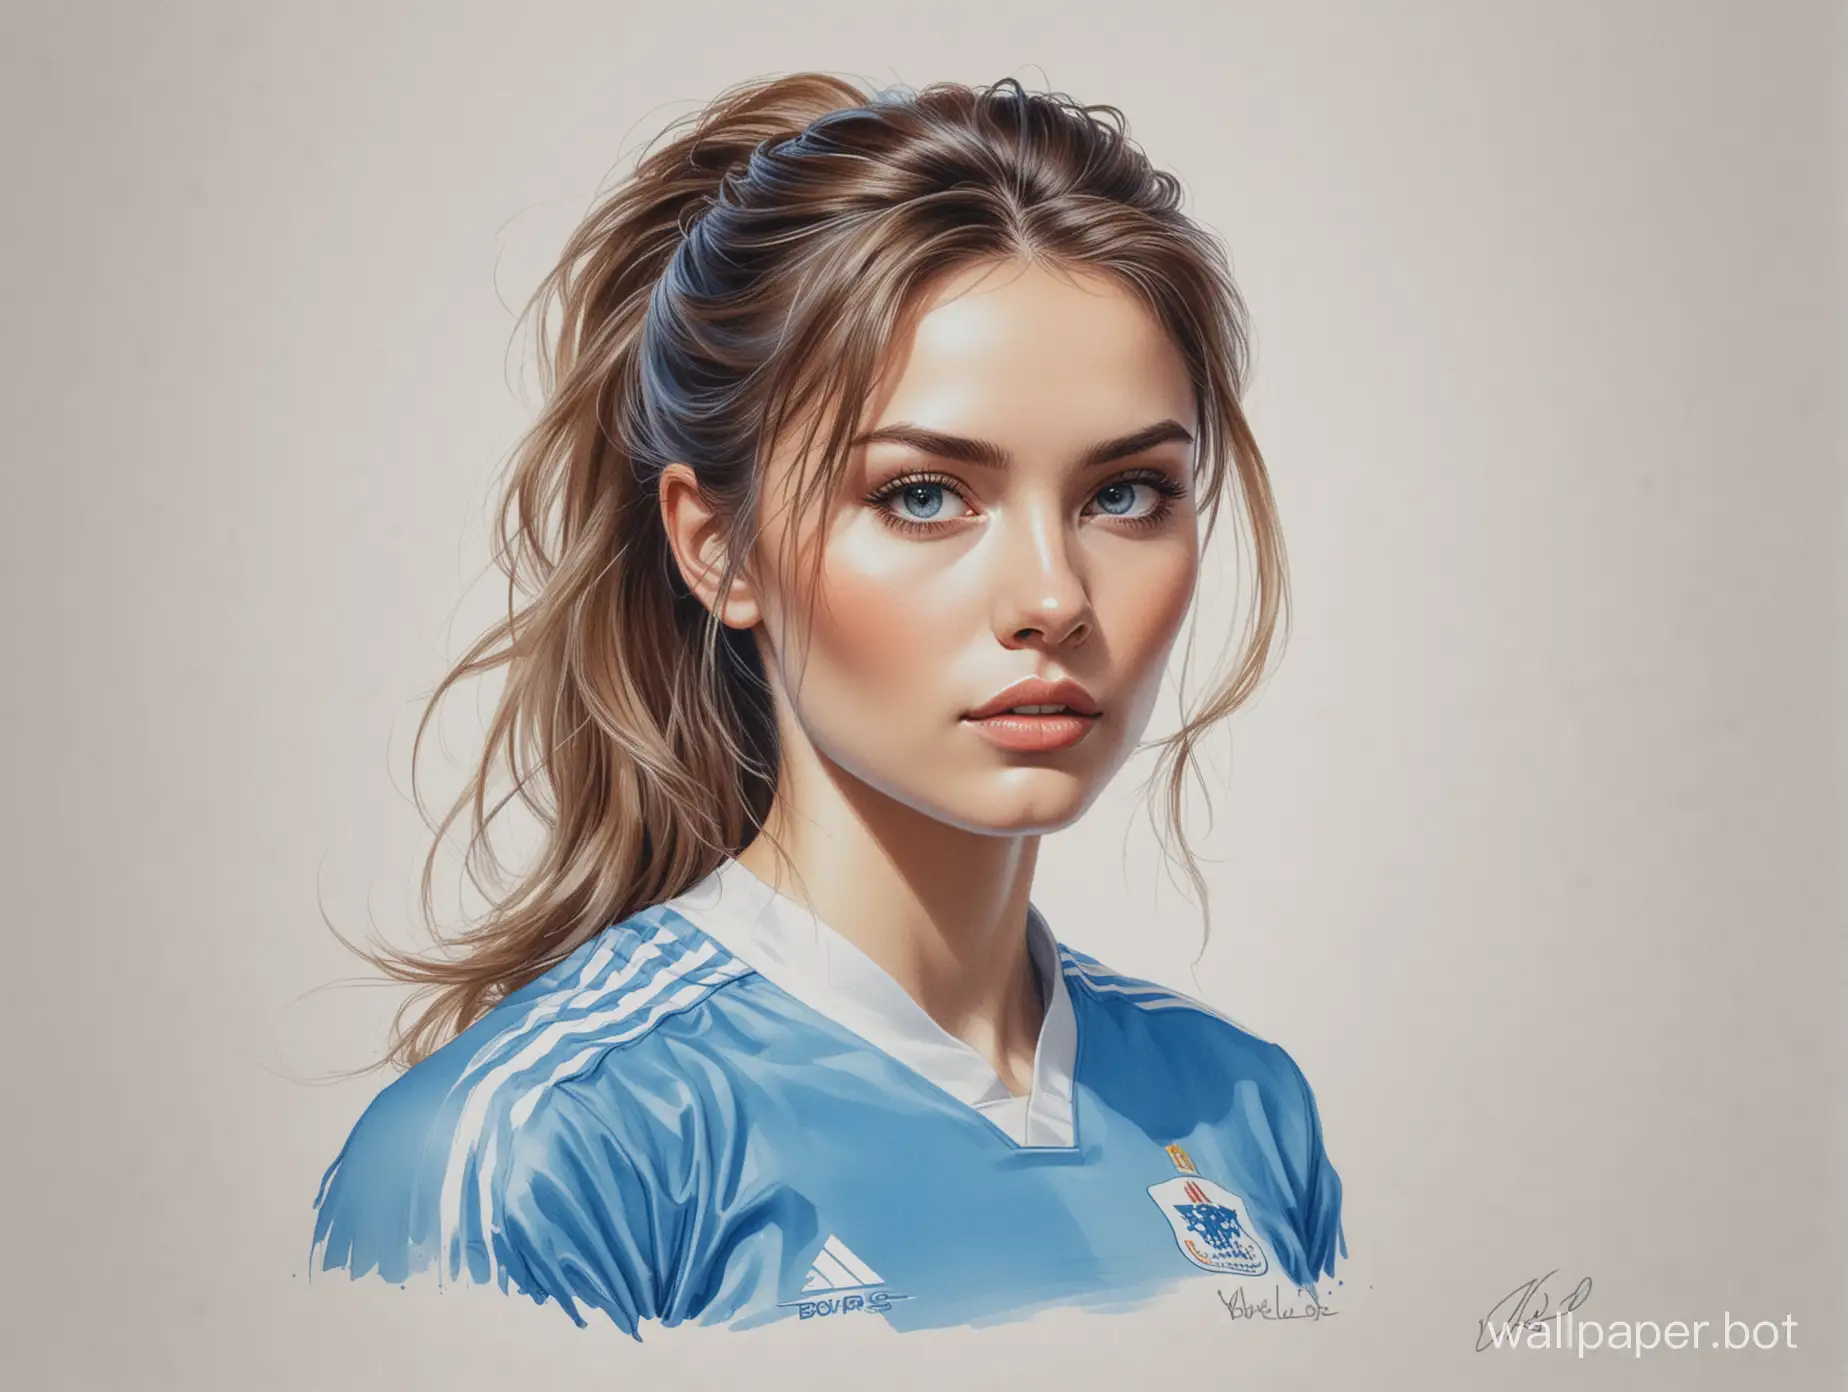 Sketch Anna Petrova light loose hair with a hairstyle 4 breast size narrow waist In blue soccer uniform white background marker sketch Style Boris Vallejo portrait